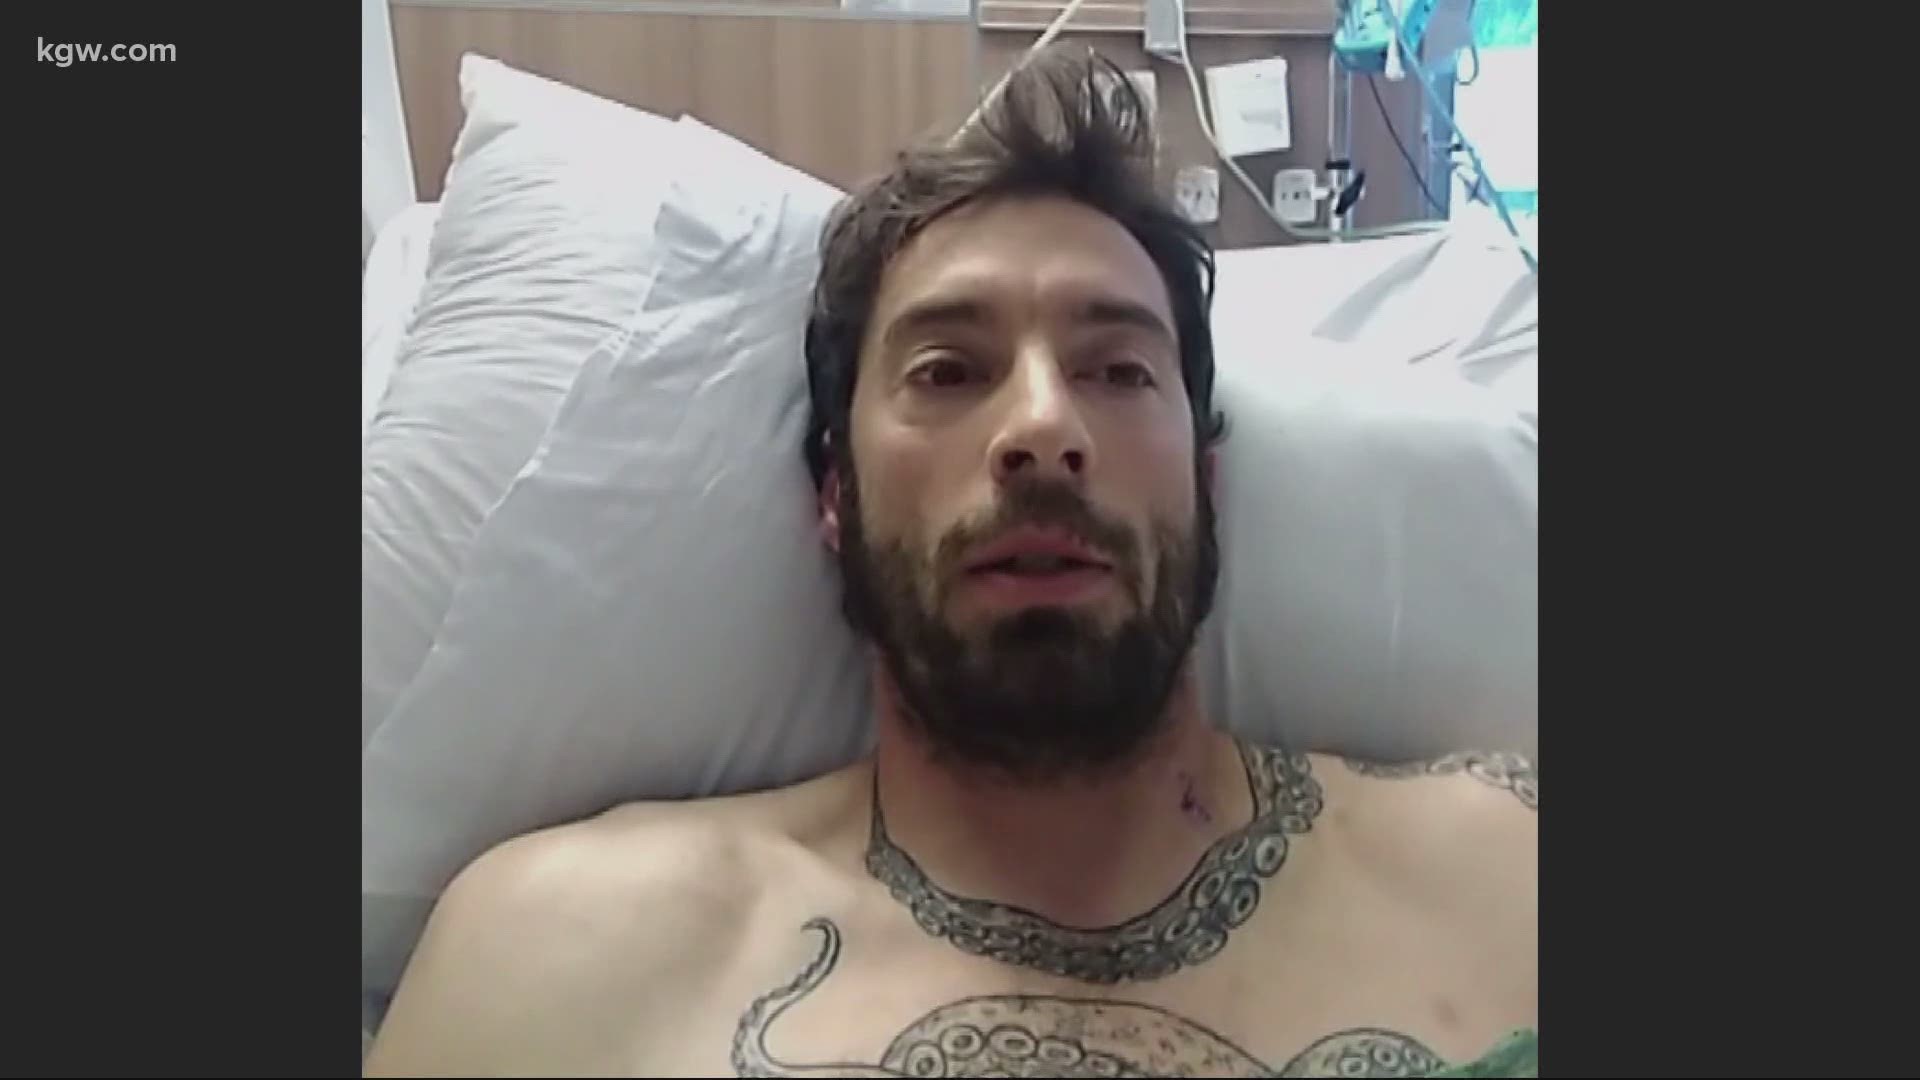 A Portland cyclist says he was shot by an angry driver on the road.